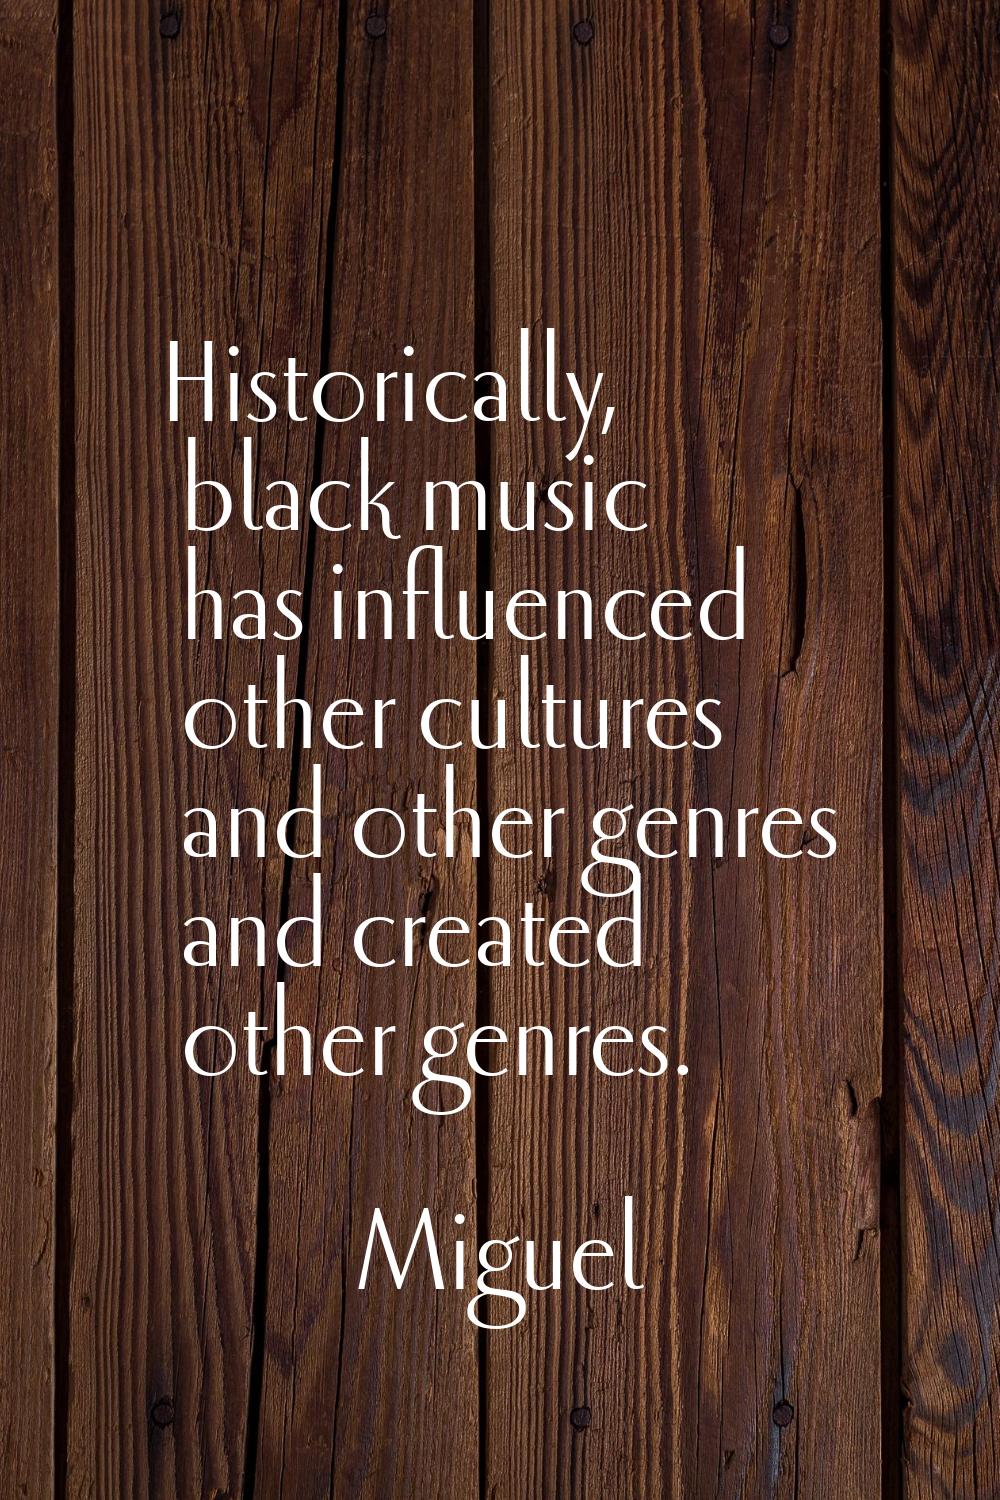 Historically, black music has influenced other cultures and other genres and created other genres.